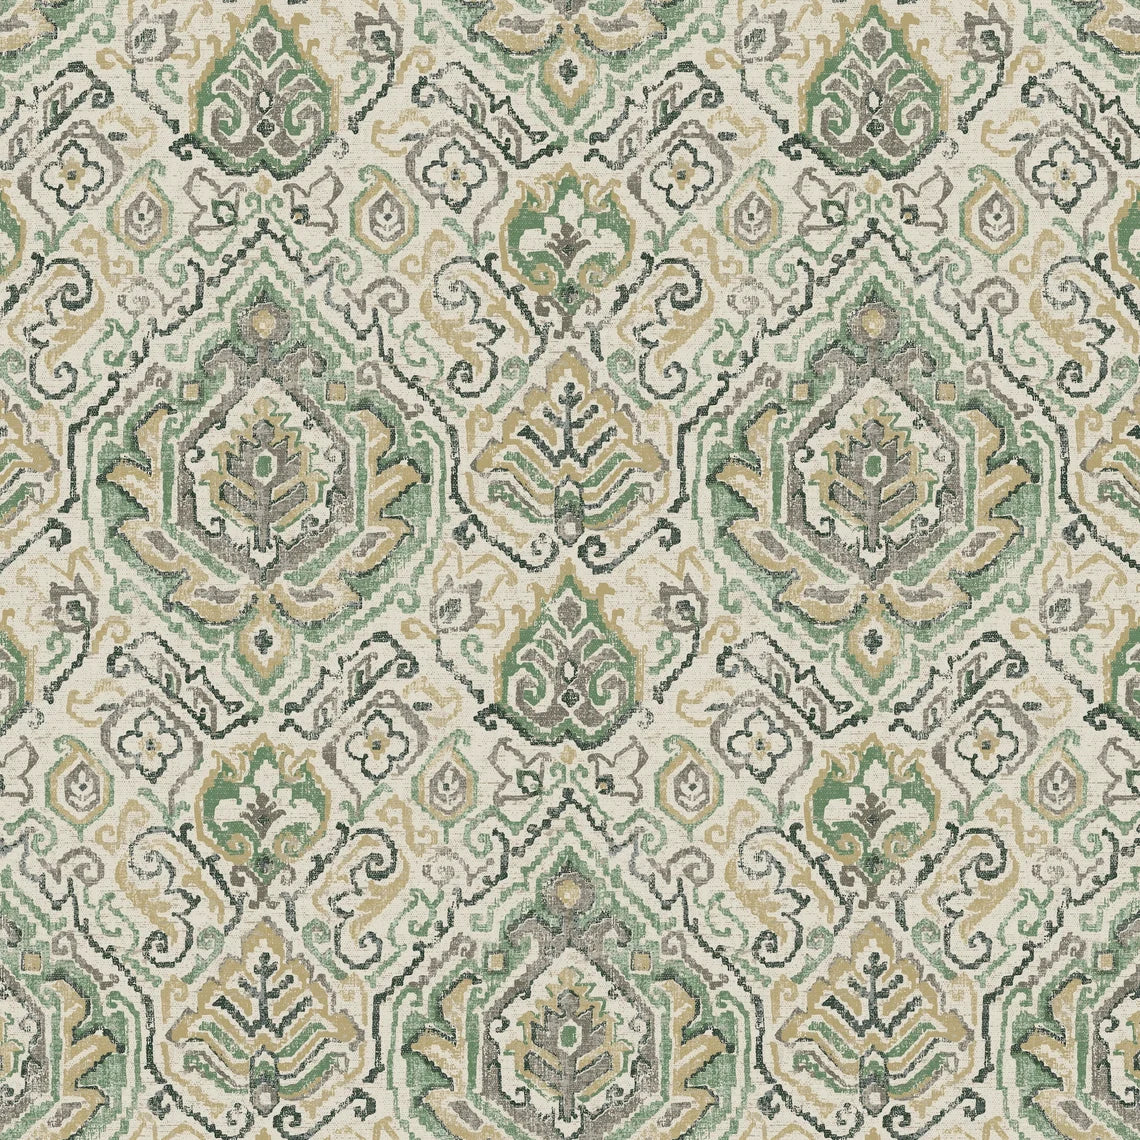 Tailored Crib Skirt in Cathell Meadow Green Medallion Weathered Persian Rug Design- Large Scale